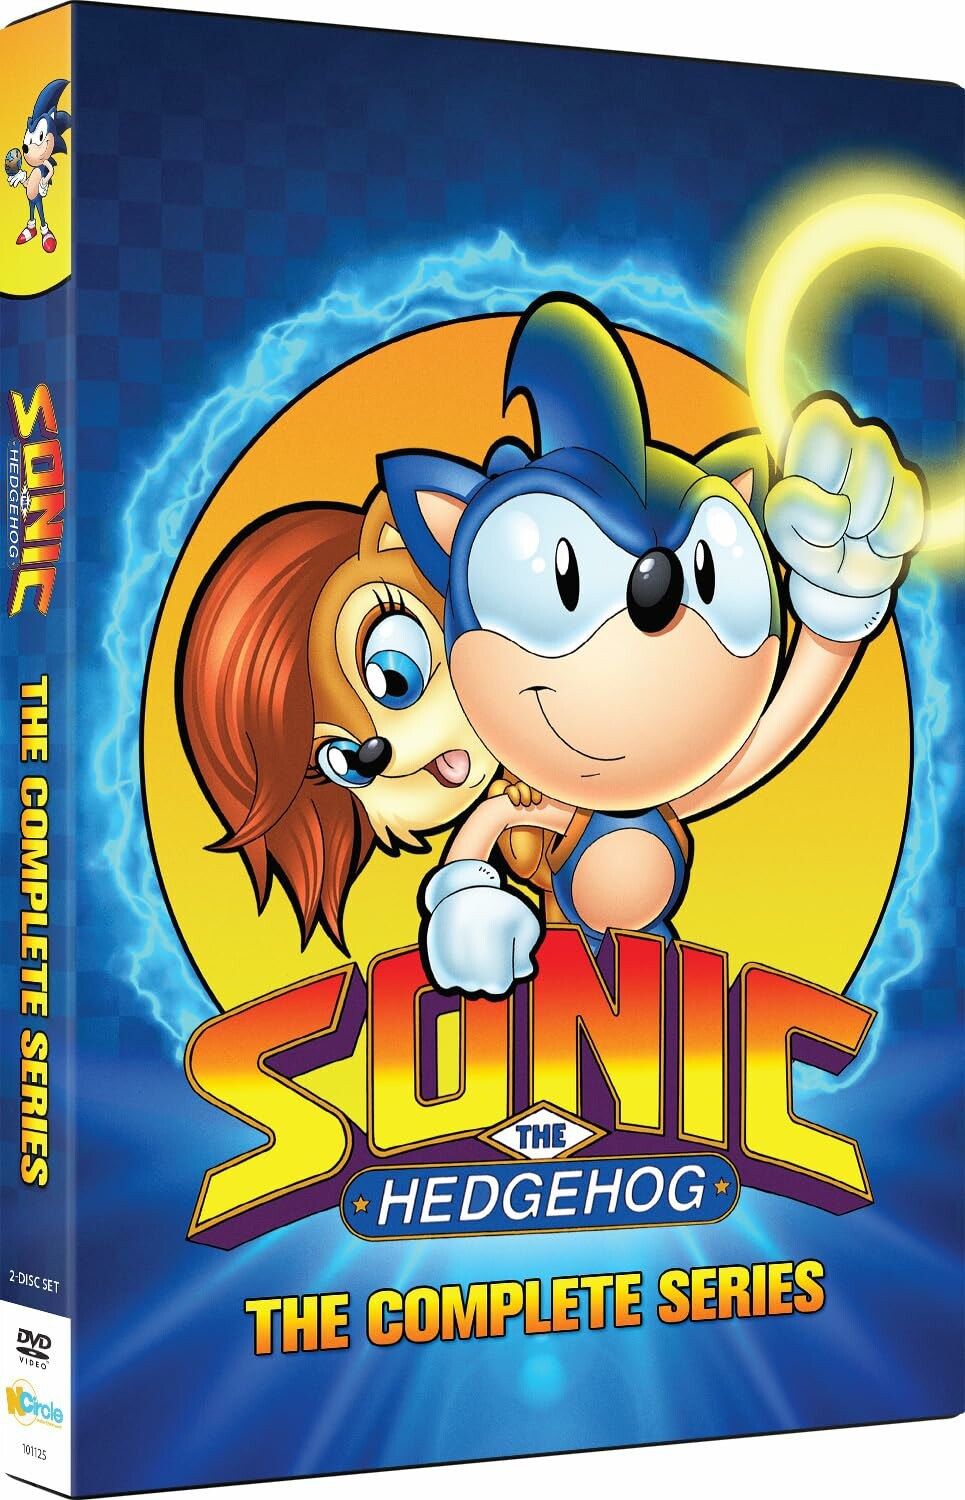 Sonic SatAM Juices Back to DVD With Complete Series Set - Media - Sonic  Stadium